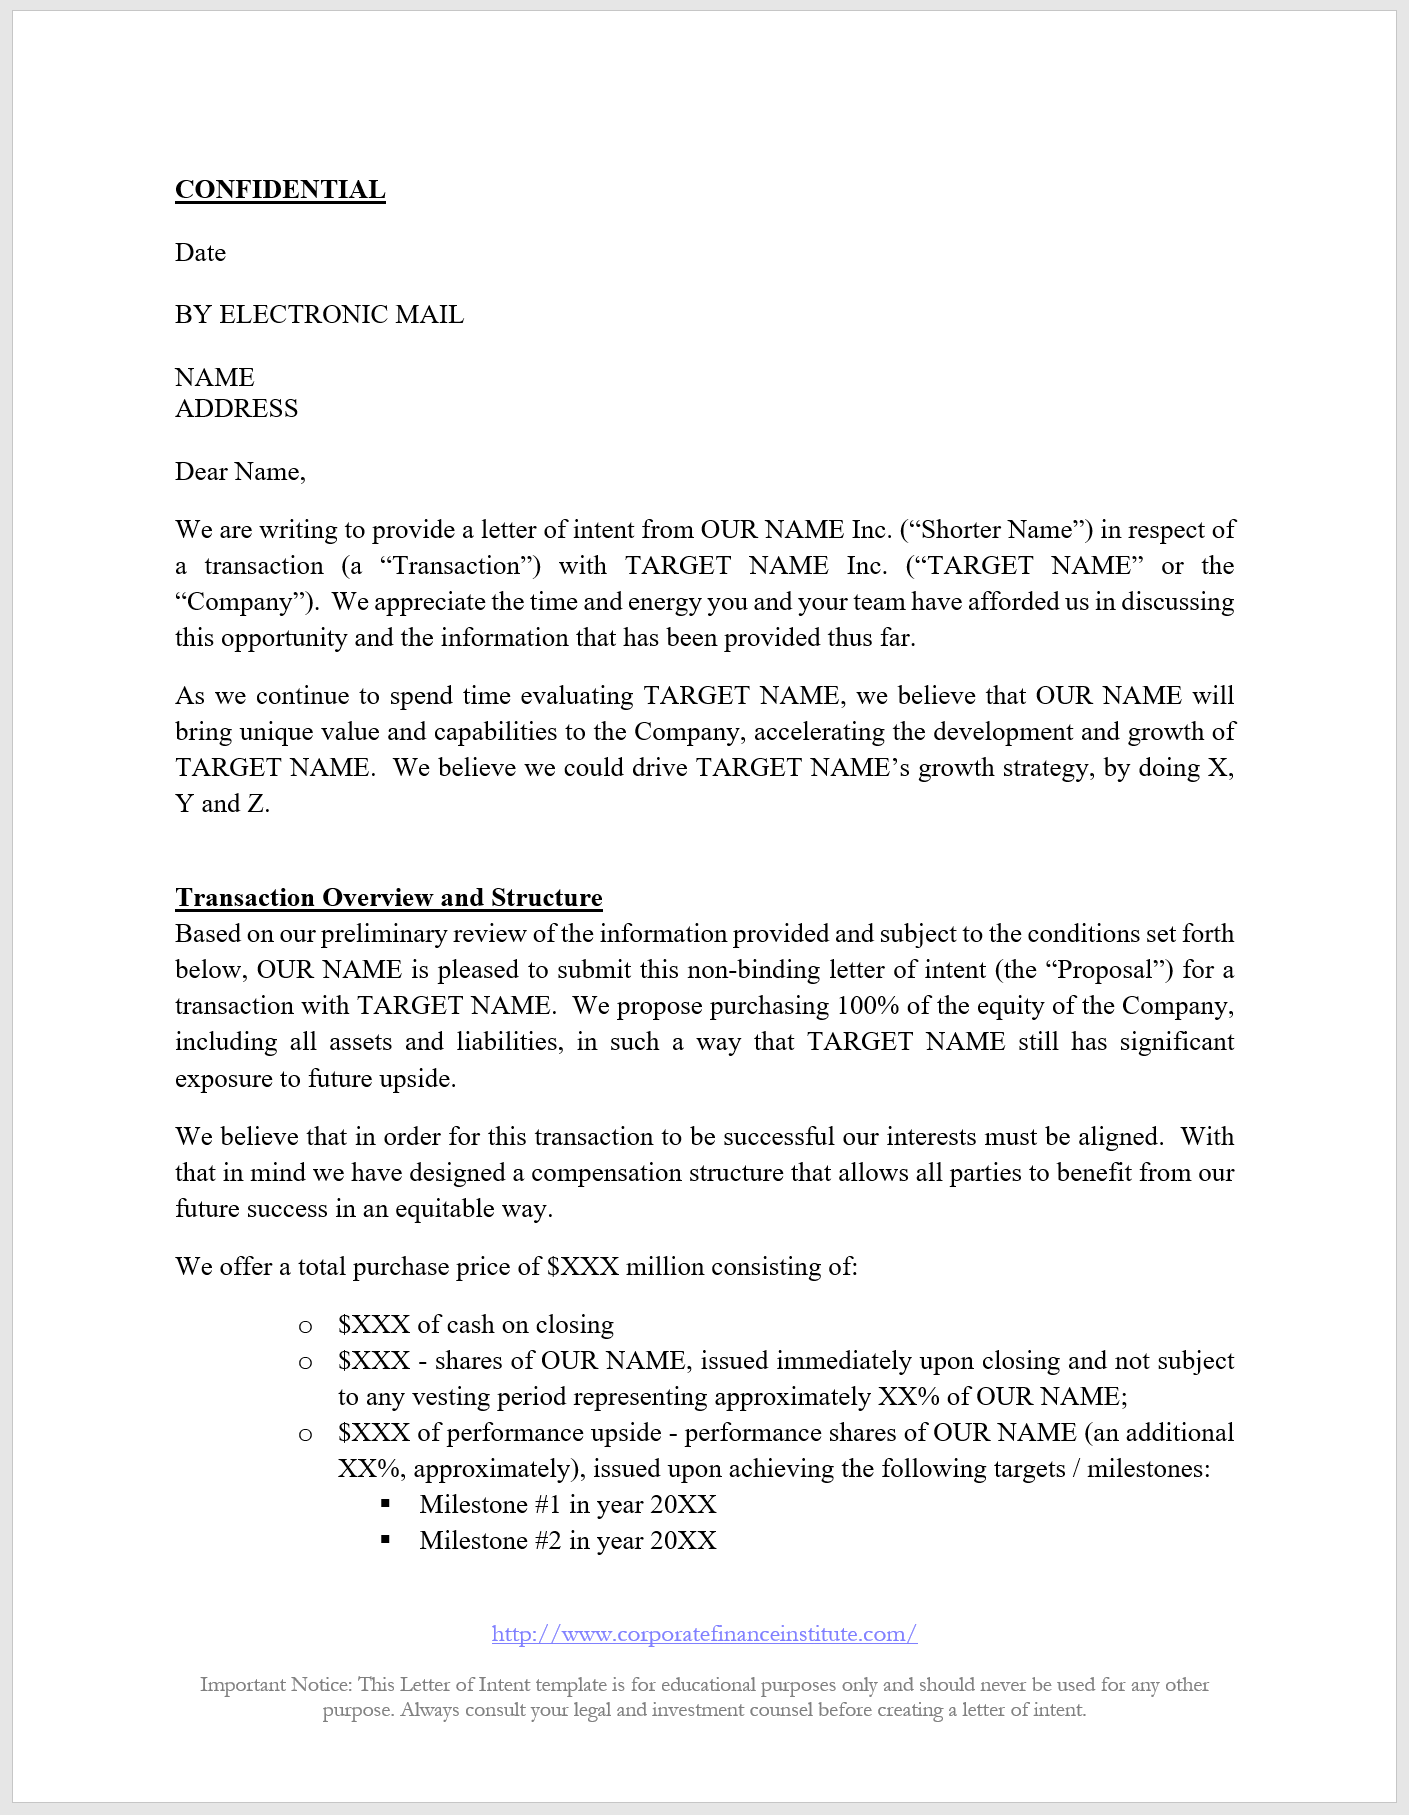 Letter Of Intent To Purchase Template from corporatefinanceinstitute.com